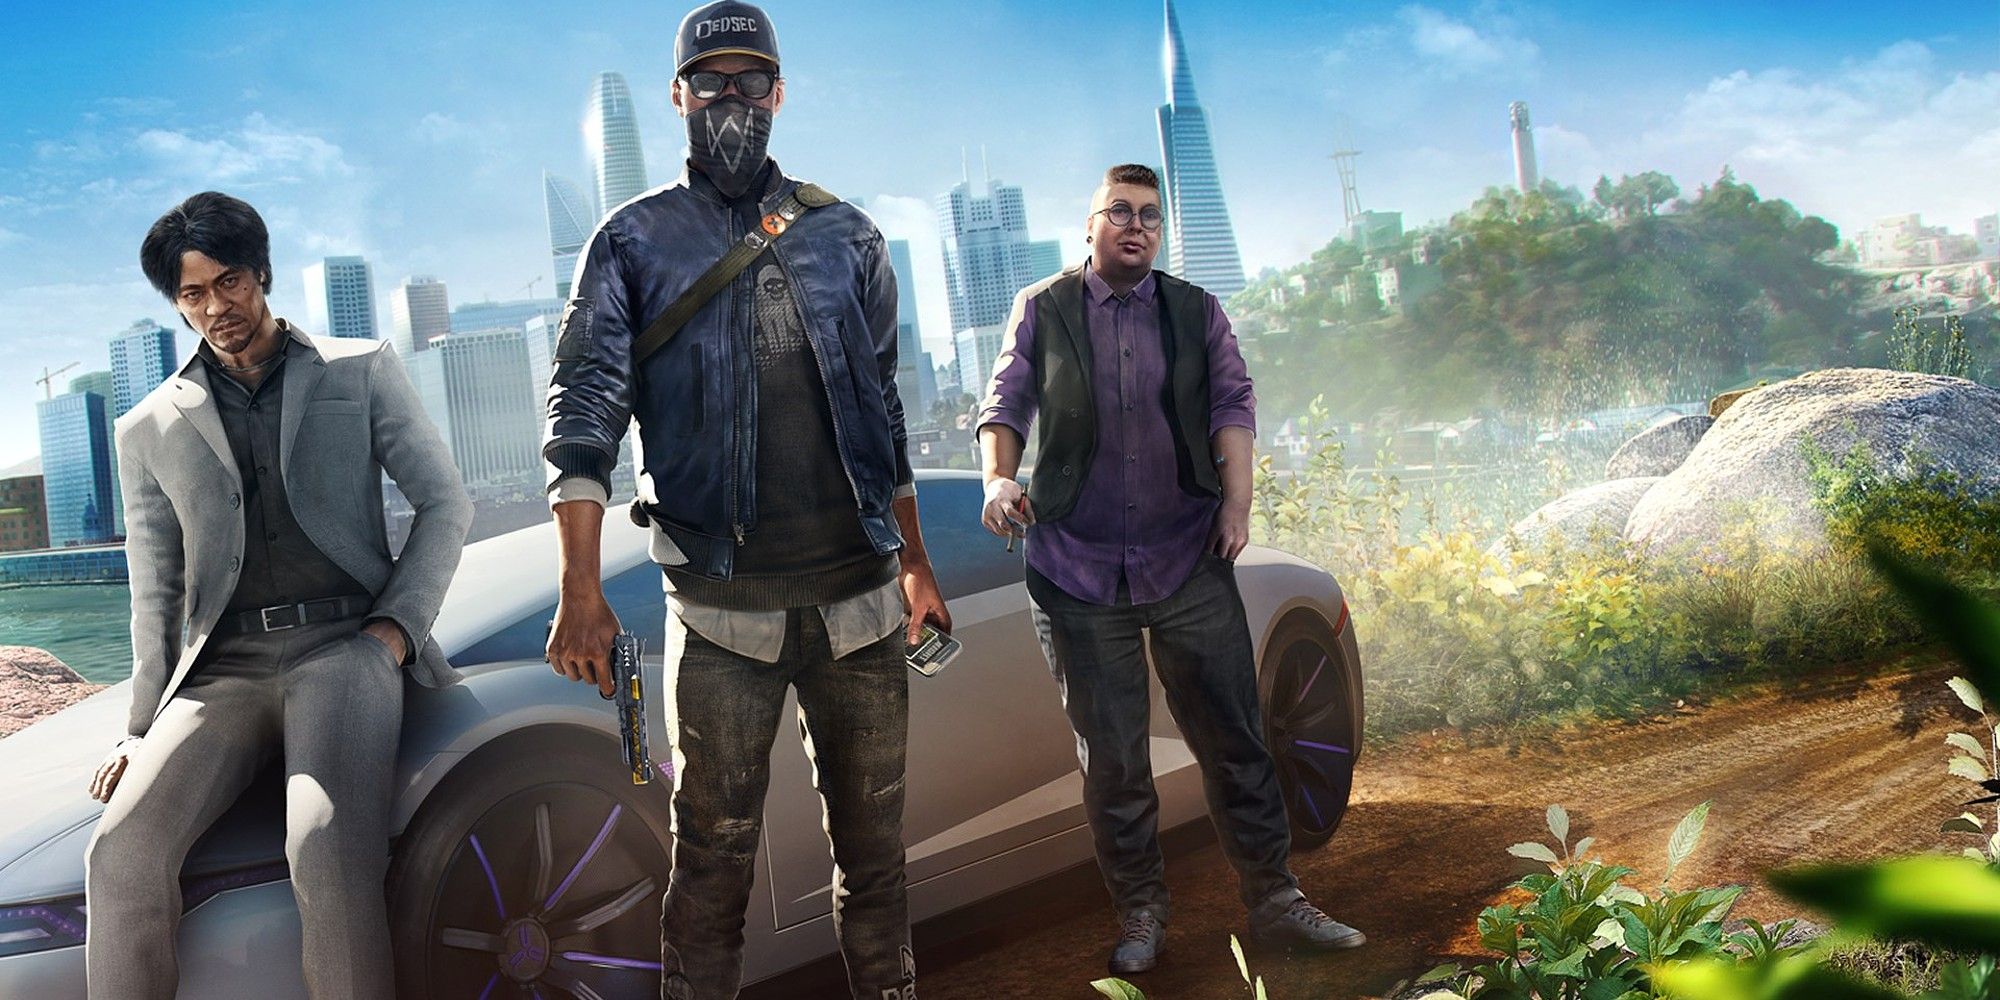 Players Discuss What City They Want To Explore Next In Watch Dogs 4